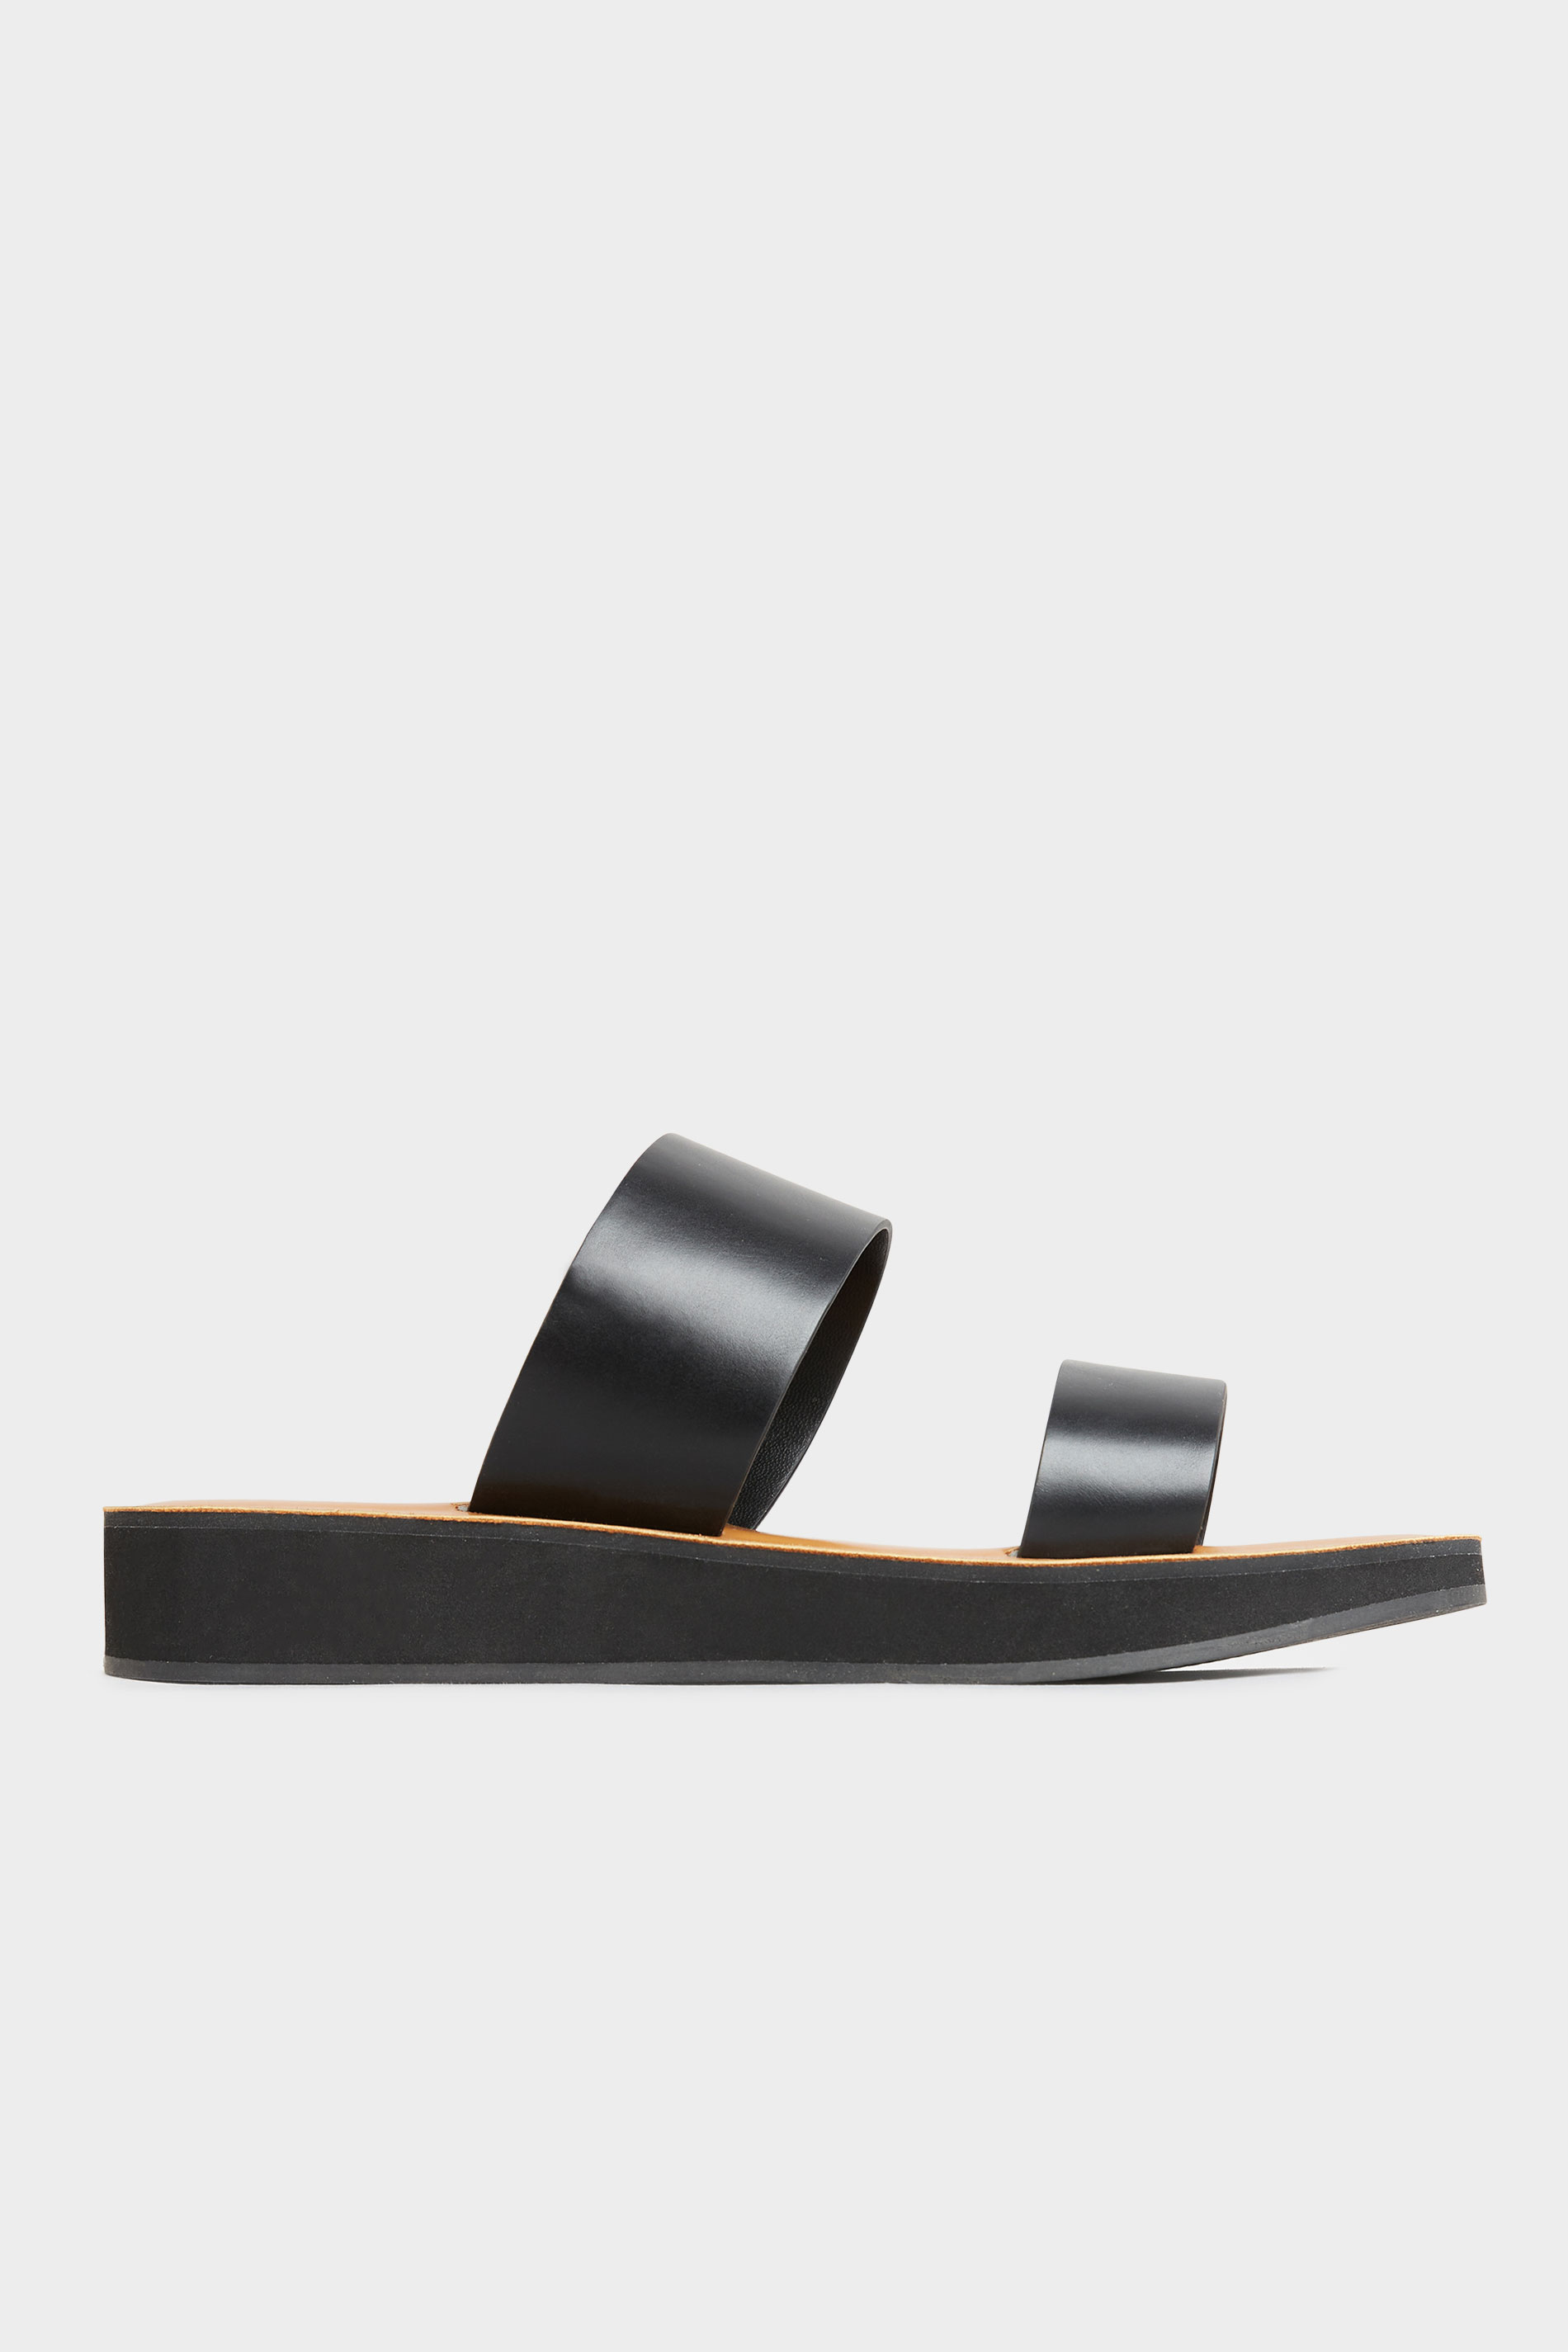 Remonte D3064-01 Odeon Elle Range Black Leather Sandals – Missy Online:  Shoes, Fashion & Accessories Based in Leeds